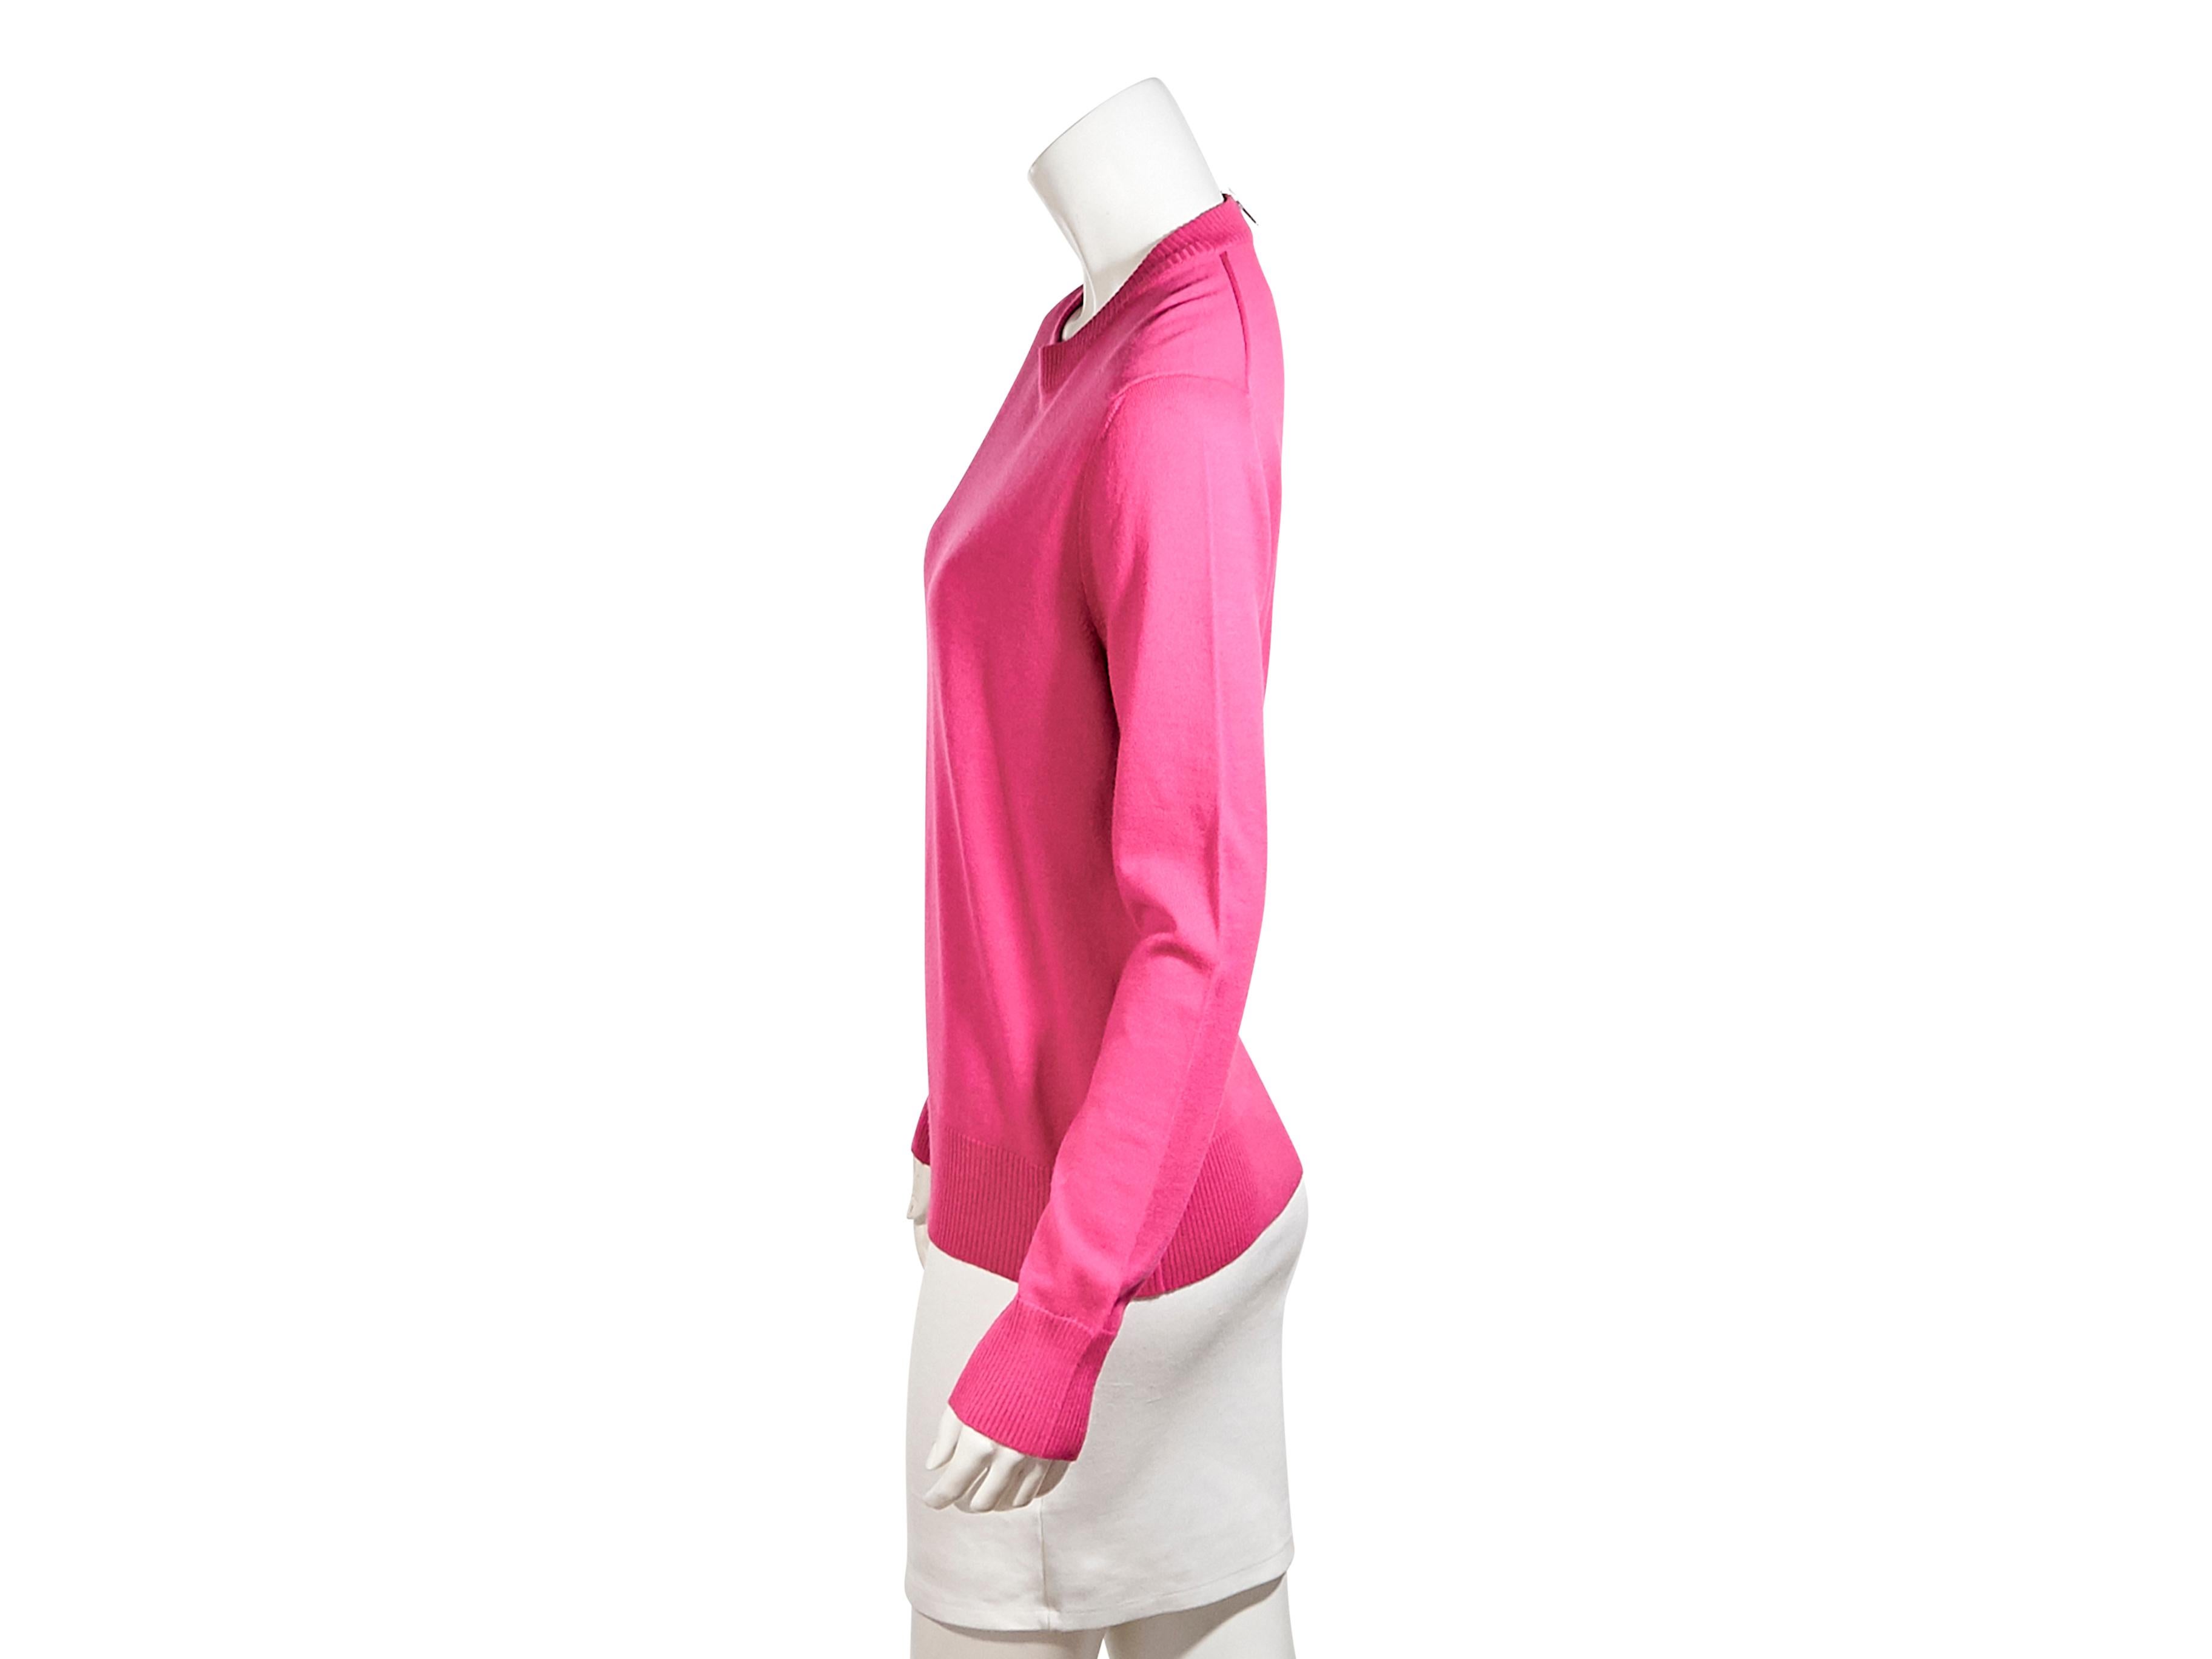 Product details:  Hot pink wool sweater by Gucci.  Long sleeves.  Roundneck.  Ribbed trim.  Quarter back-zip closure.  Pullover style.  Silvertone hardware.  38